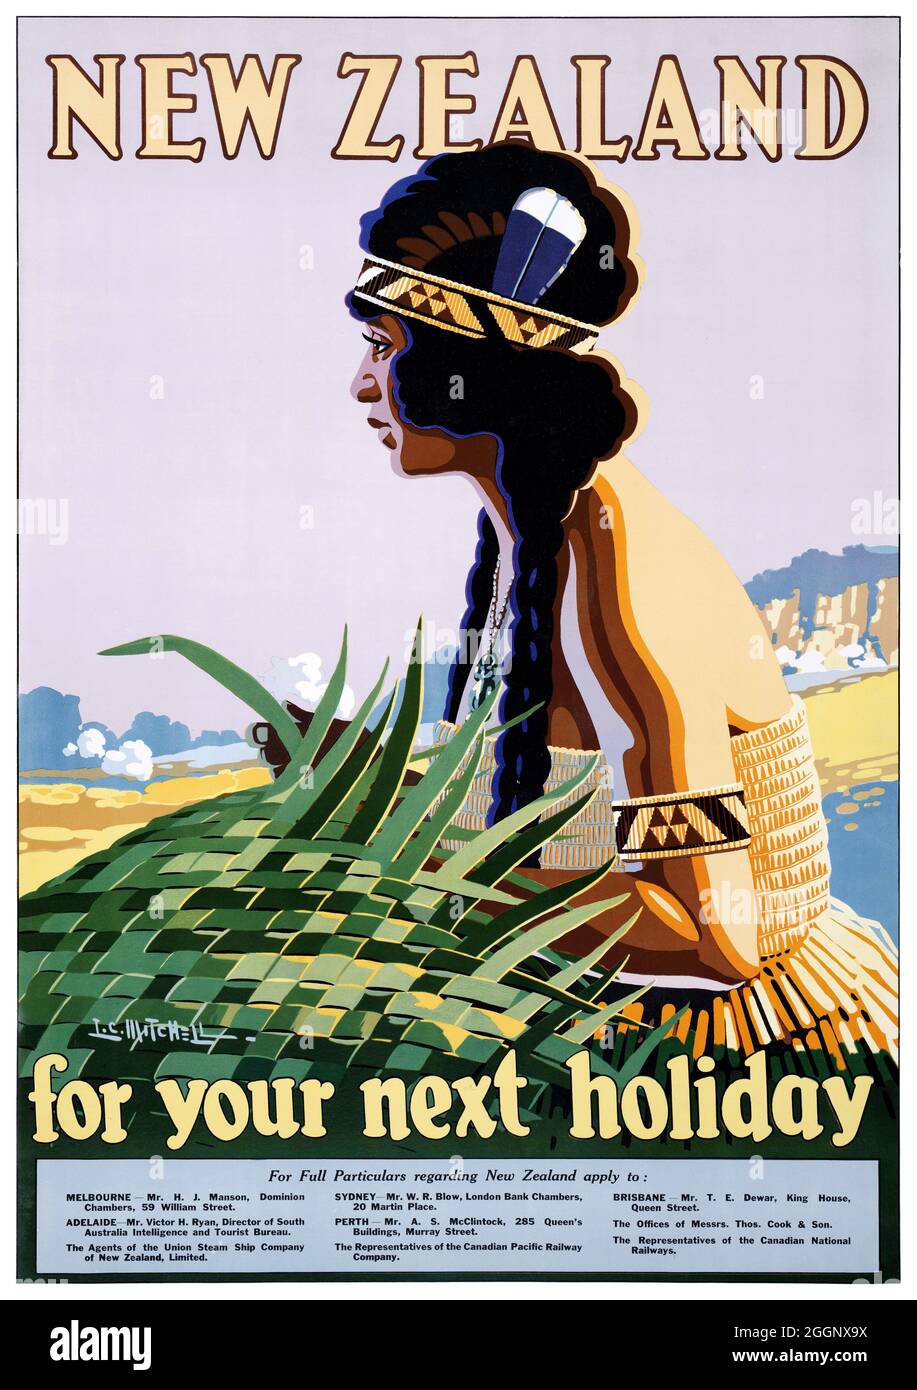 New Zealand for your next holiday by Leonard Cornwall Mitchell (1901-1971). Restored vintage poster published in 1930 in New Zealand. Stock Photo